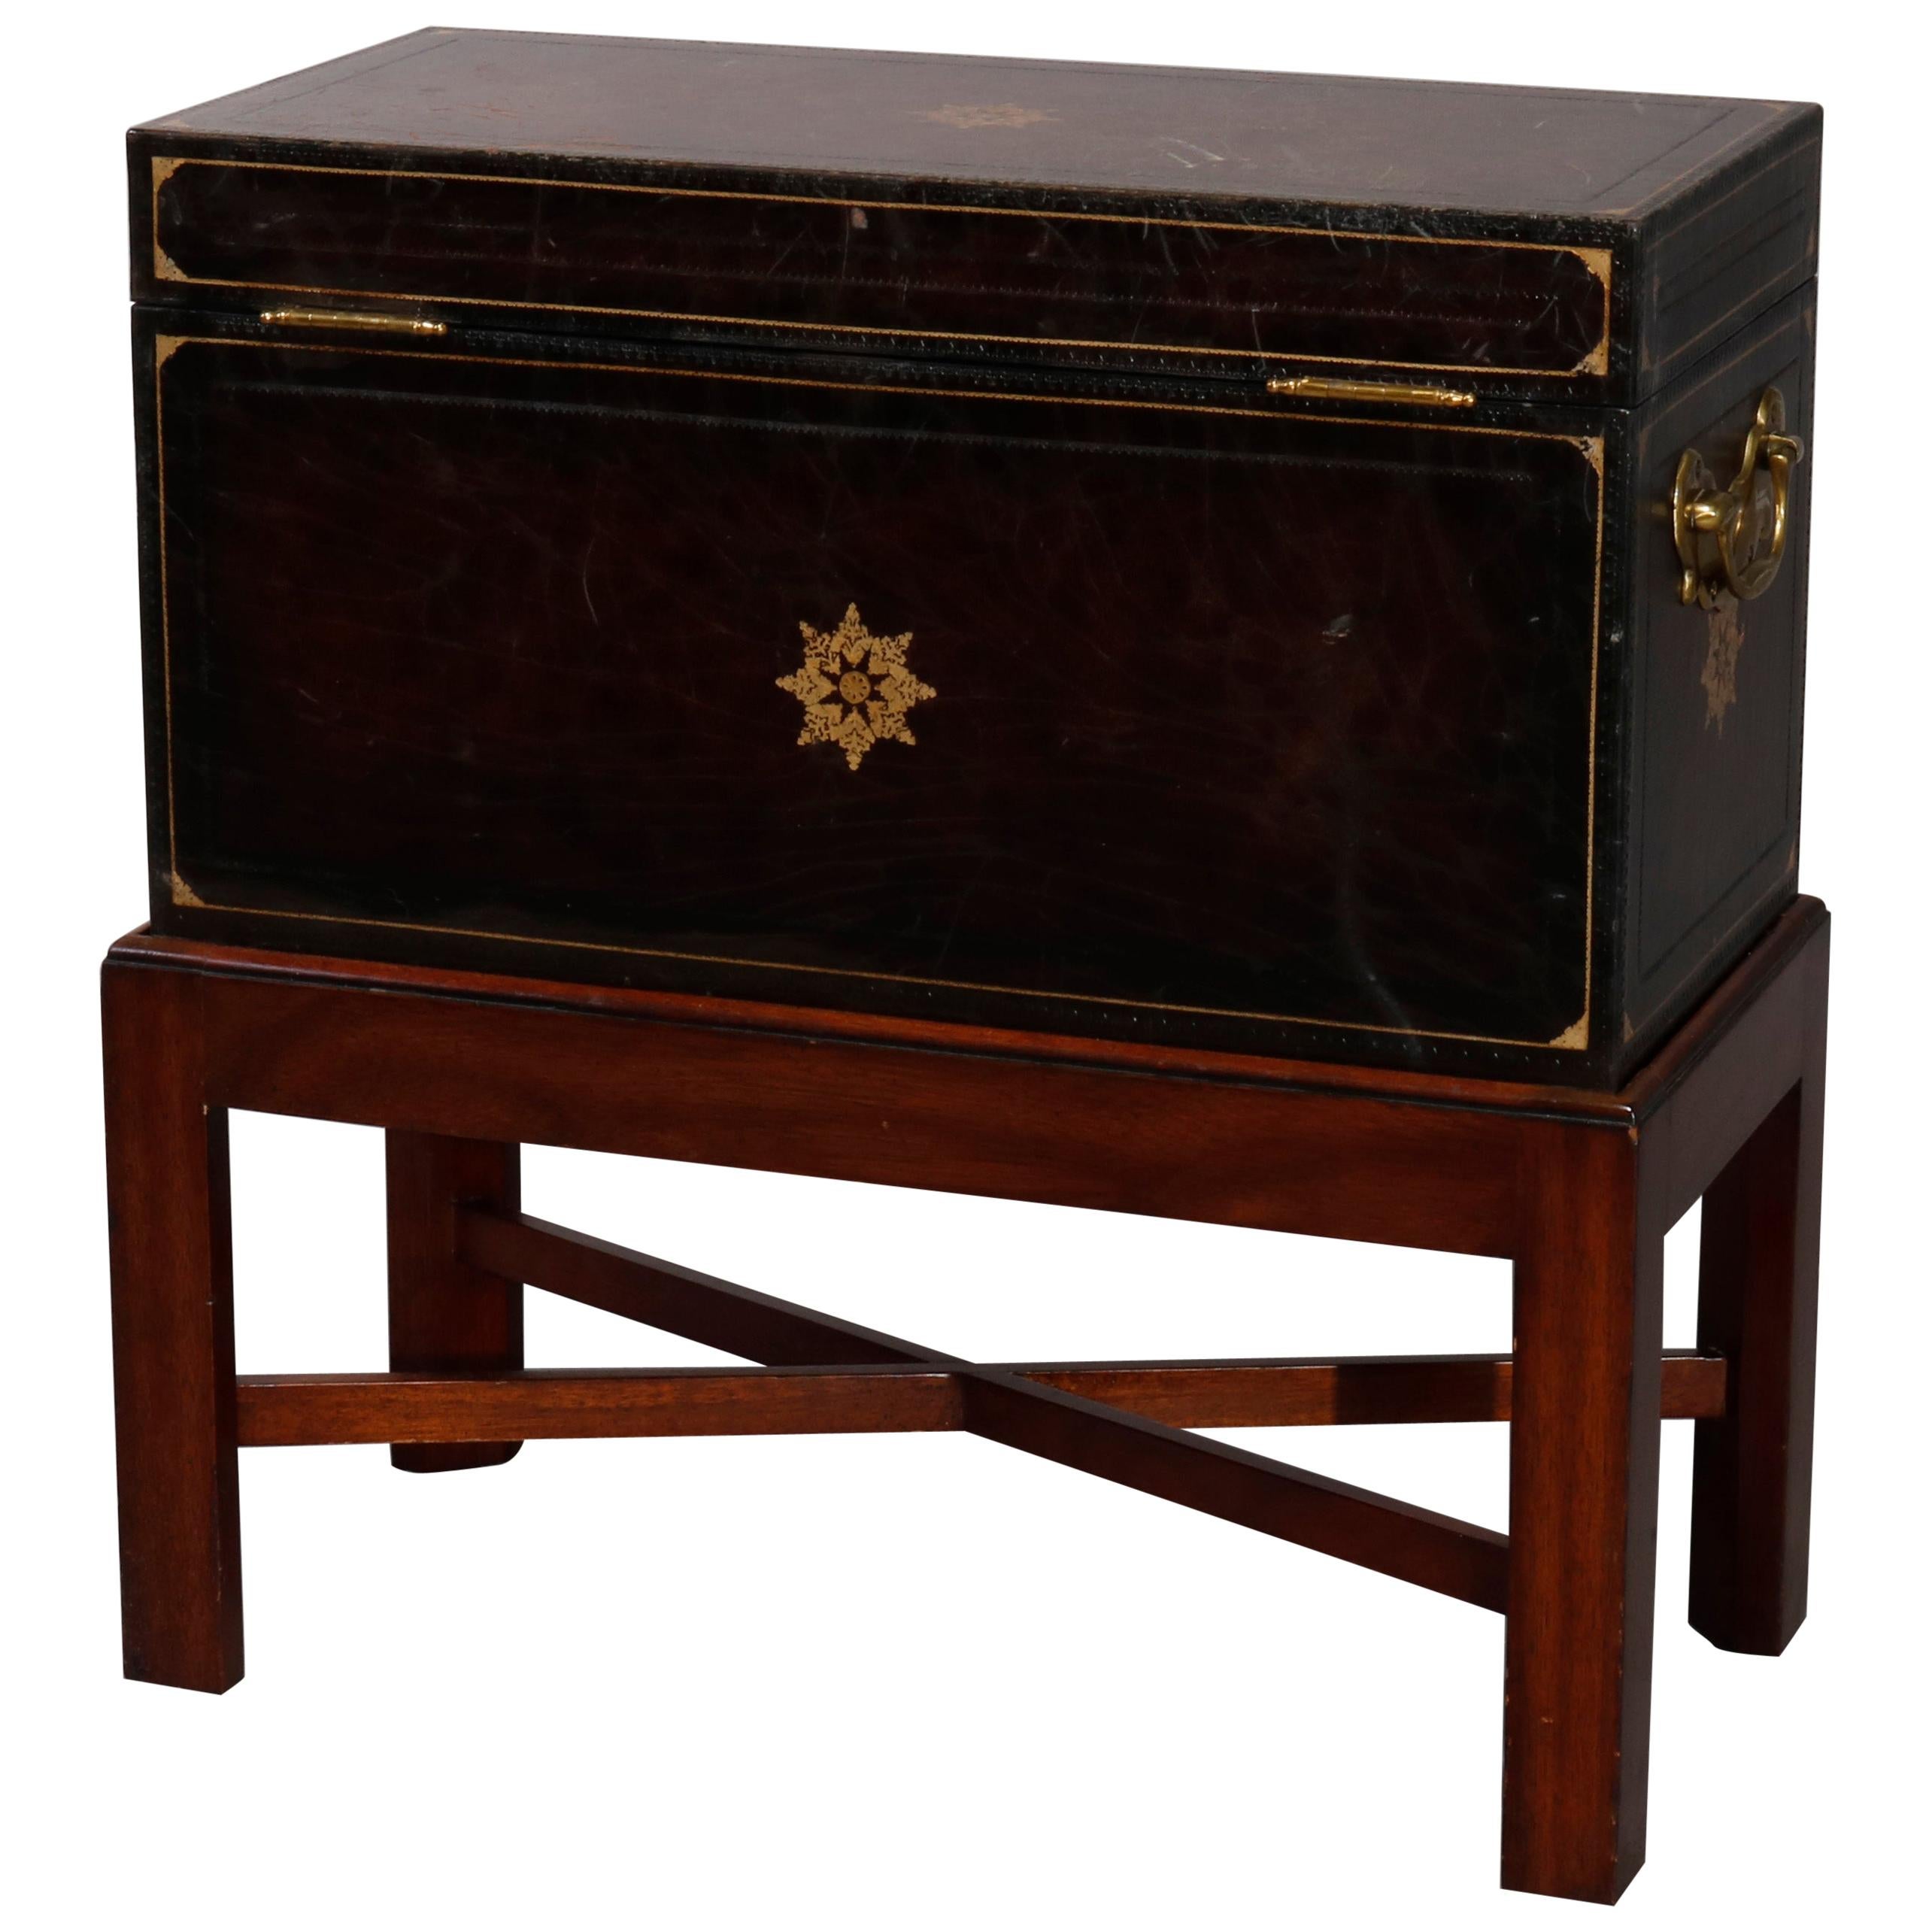 Continental Leather Dowry or Document Box on Mahogany Stand, 20th Century